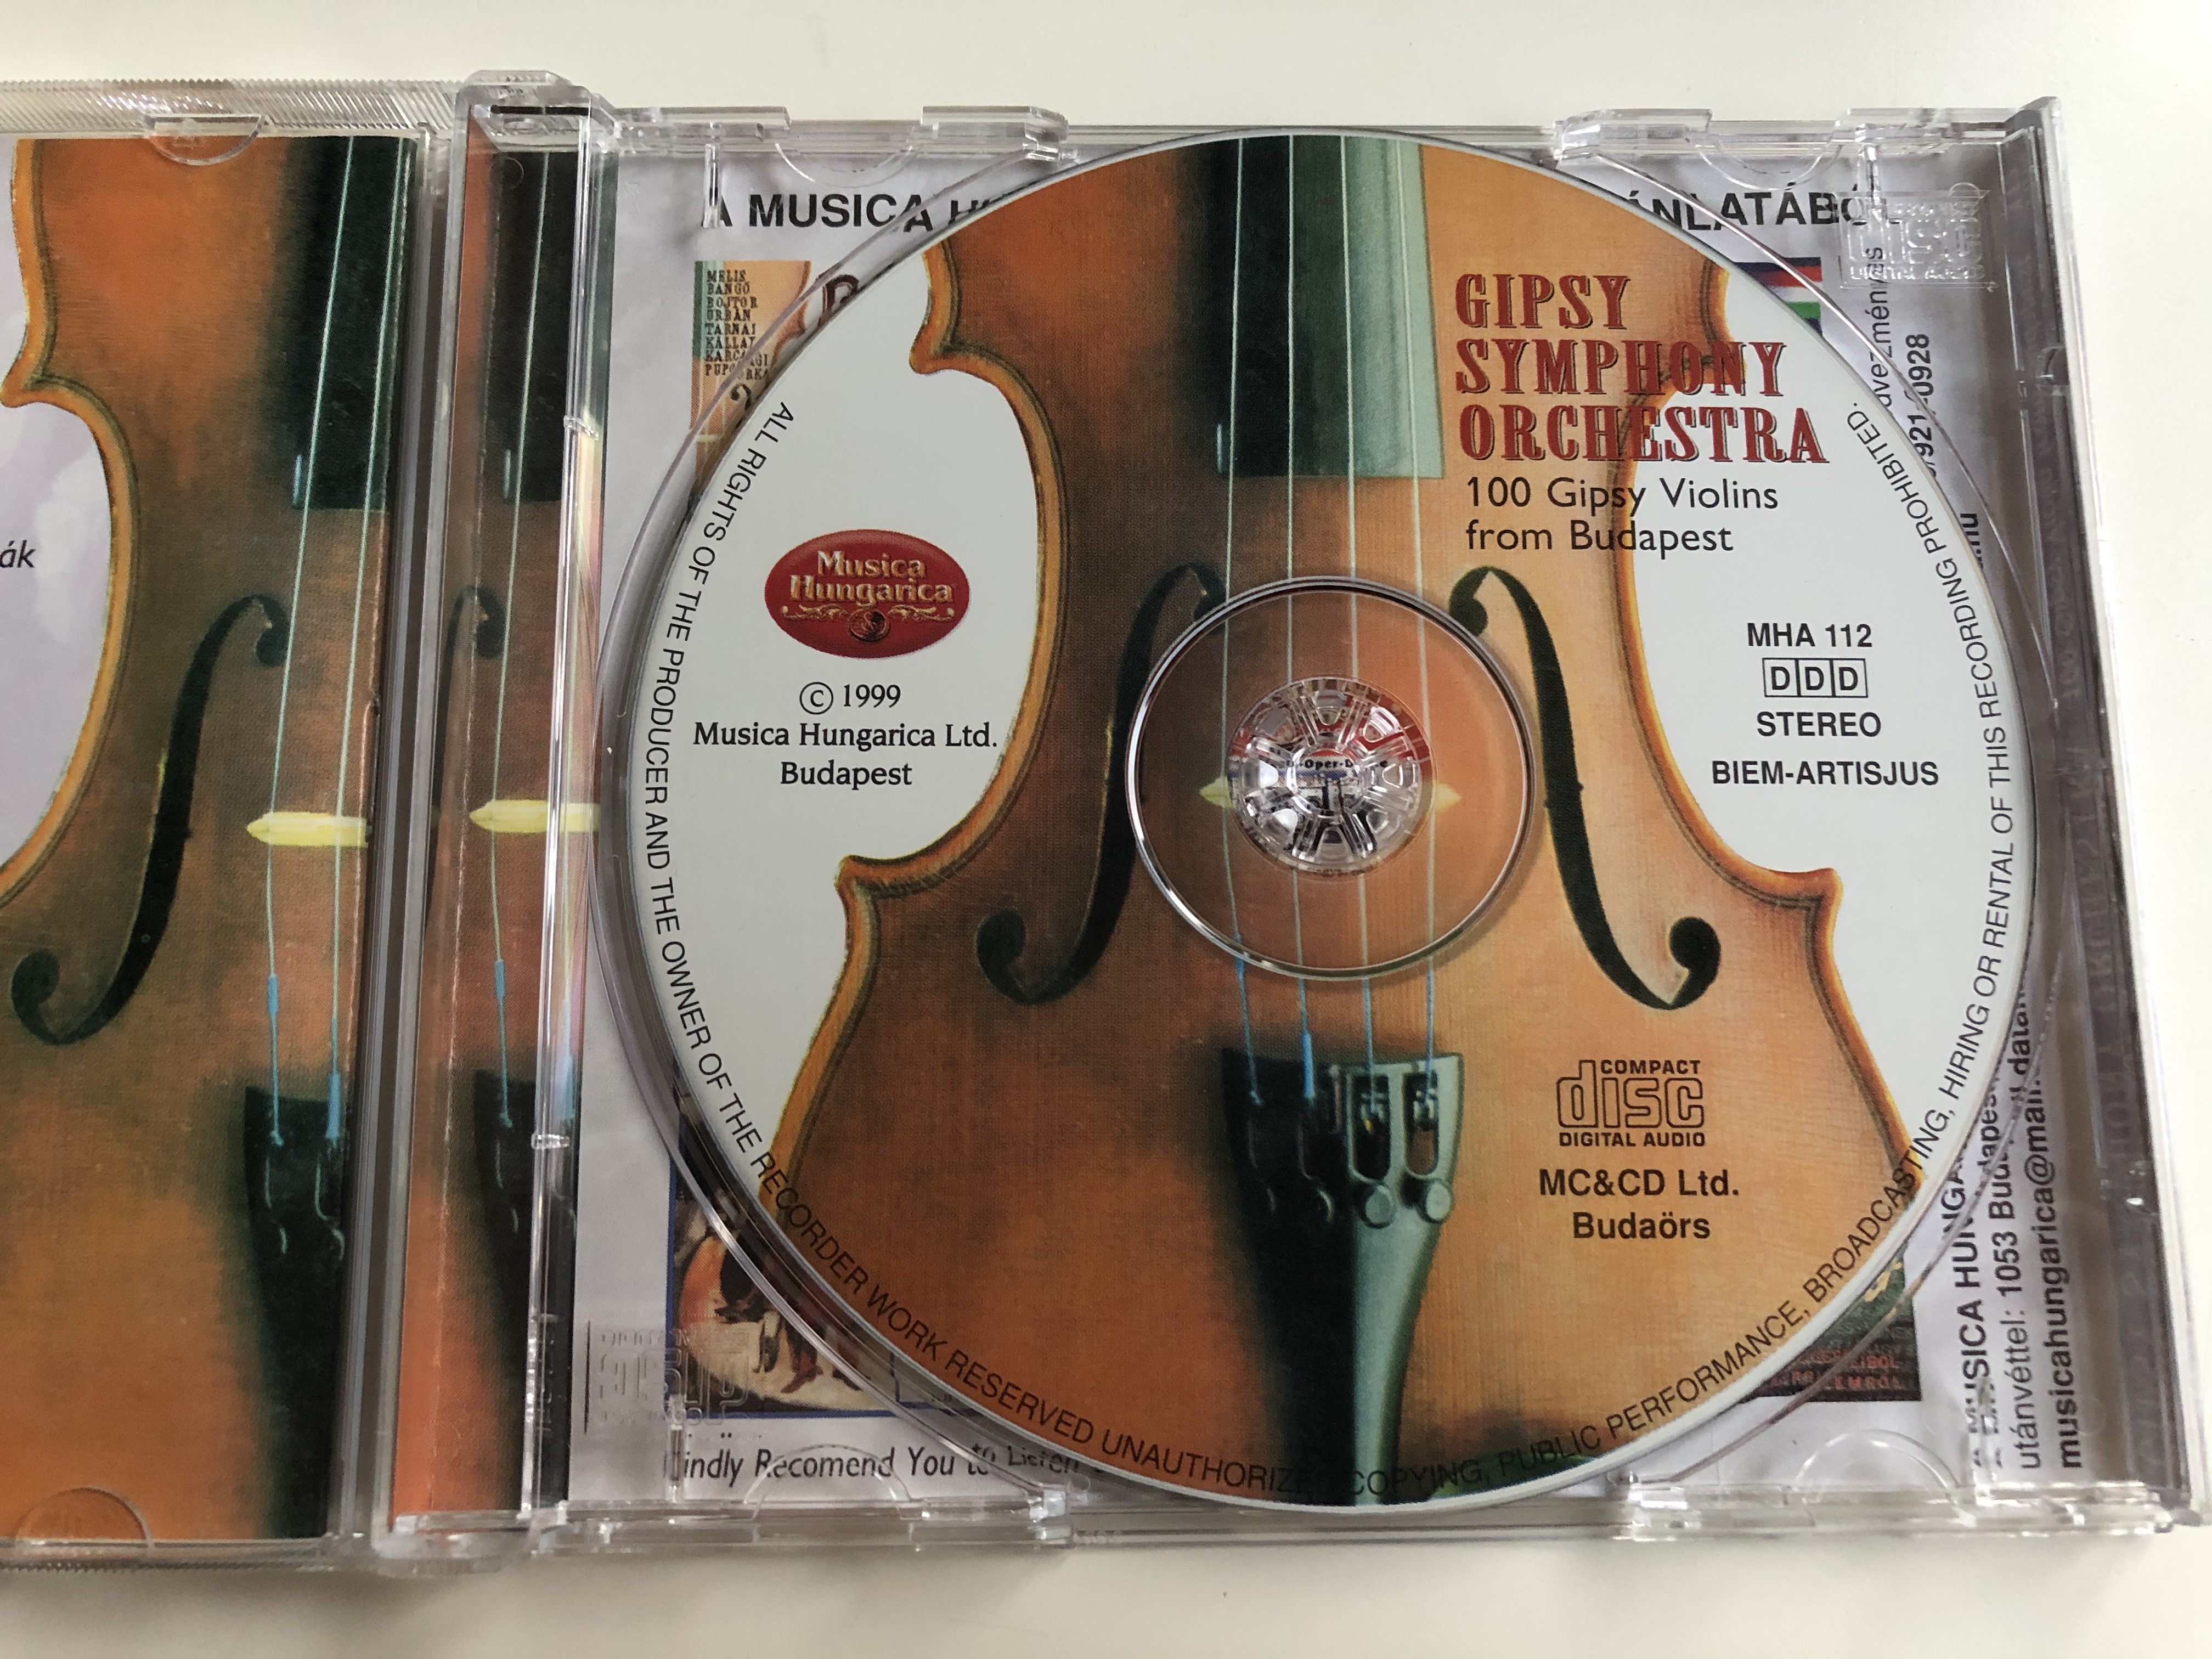 gipsy-symphony-orchestra-100-gypsy-violins-from-budapest-gold-edition-musica-hungarica-audio-cd-1999-stereo-mha-112-8-.jpg